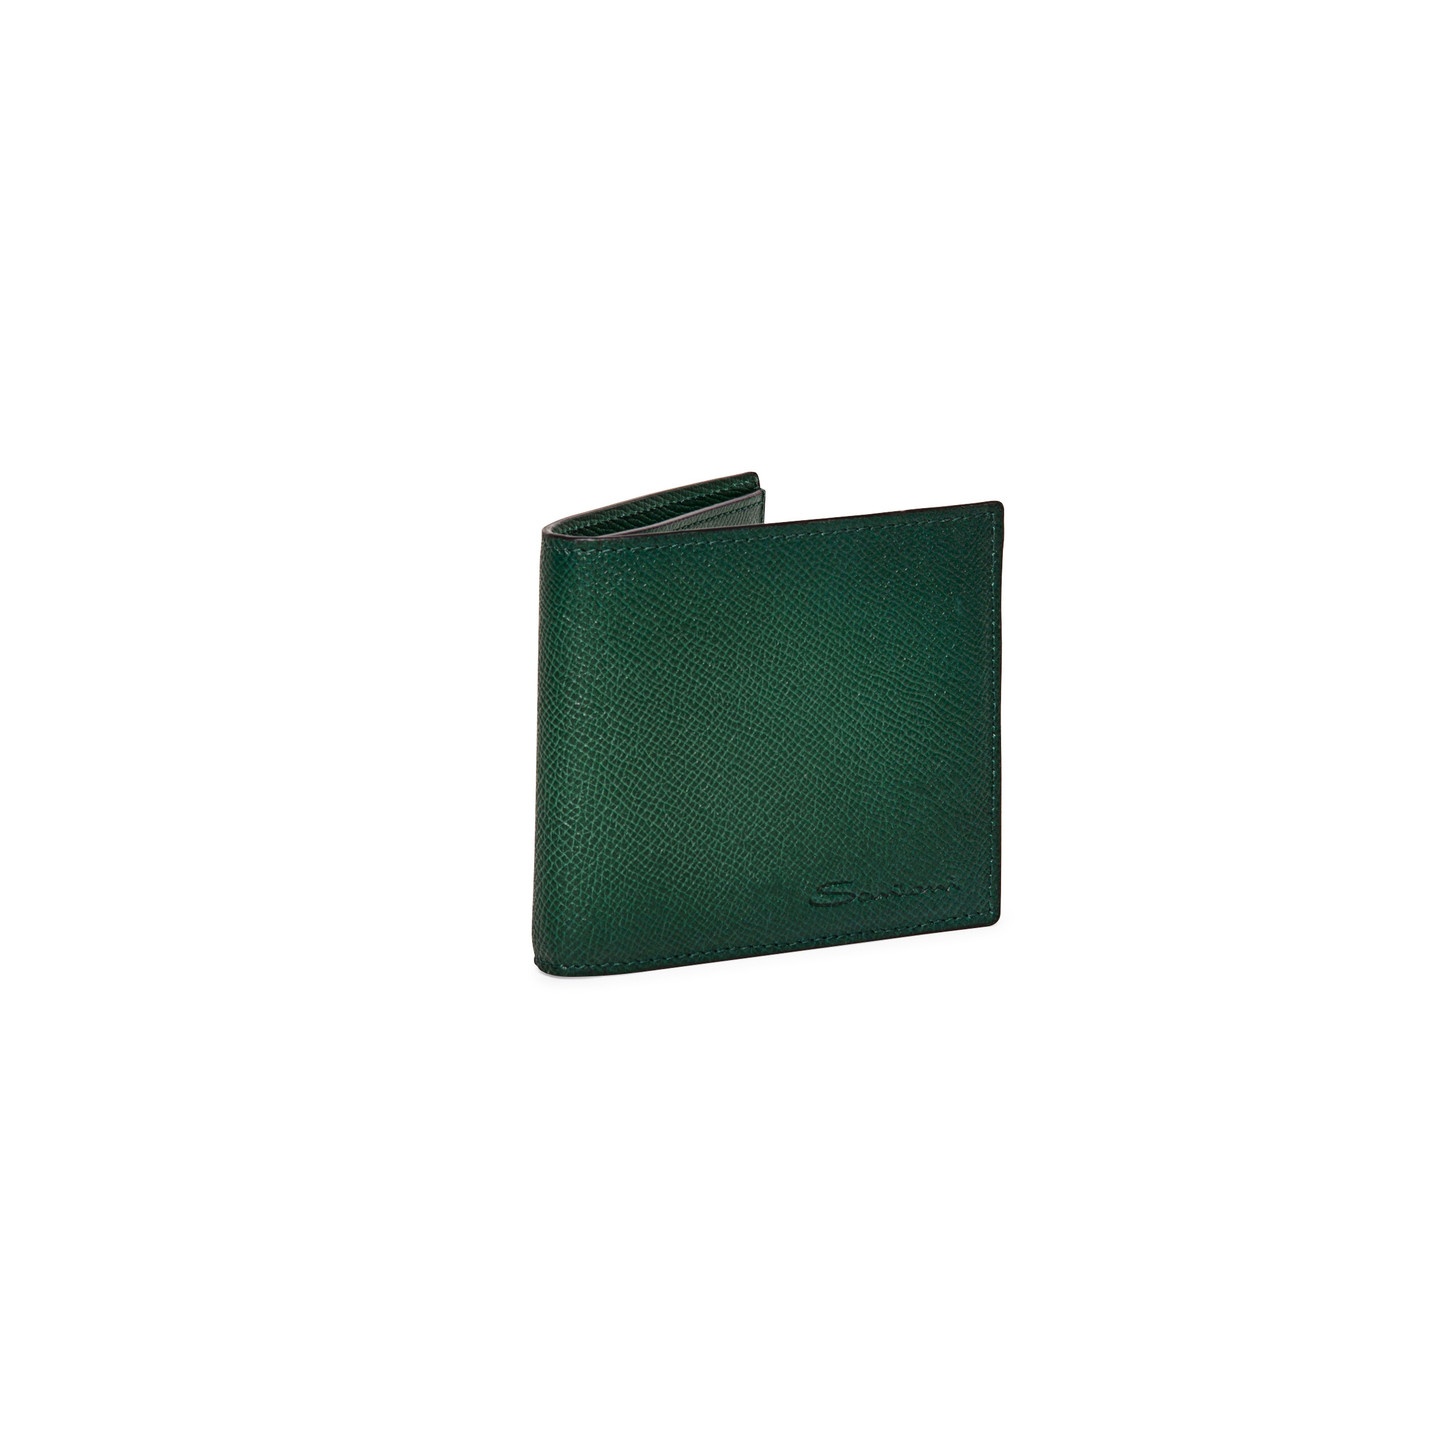 Green saffiano leather wallet - 4